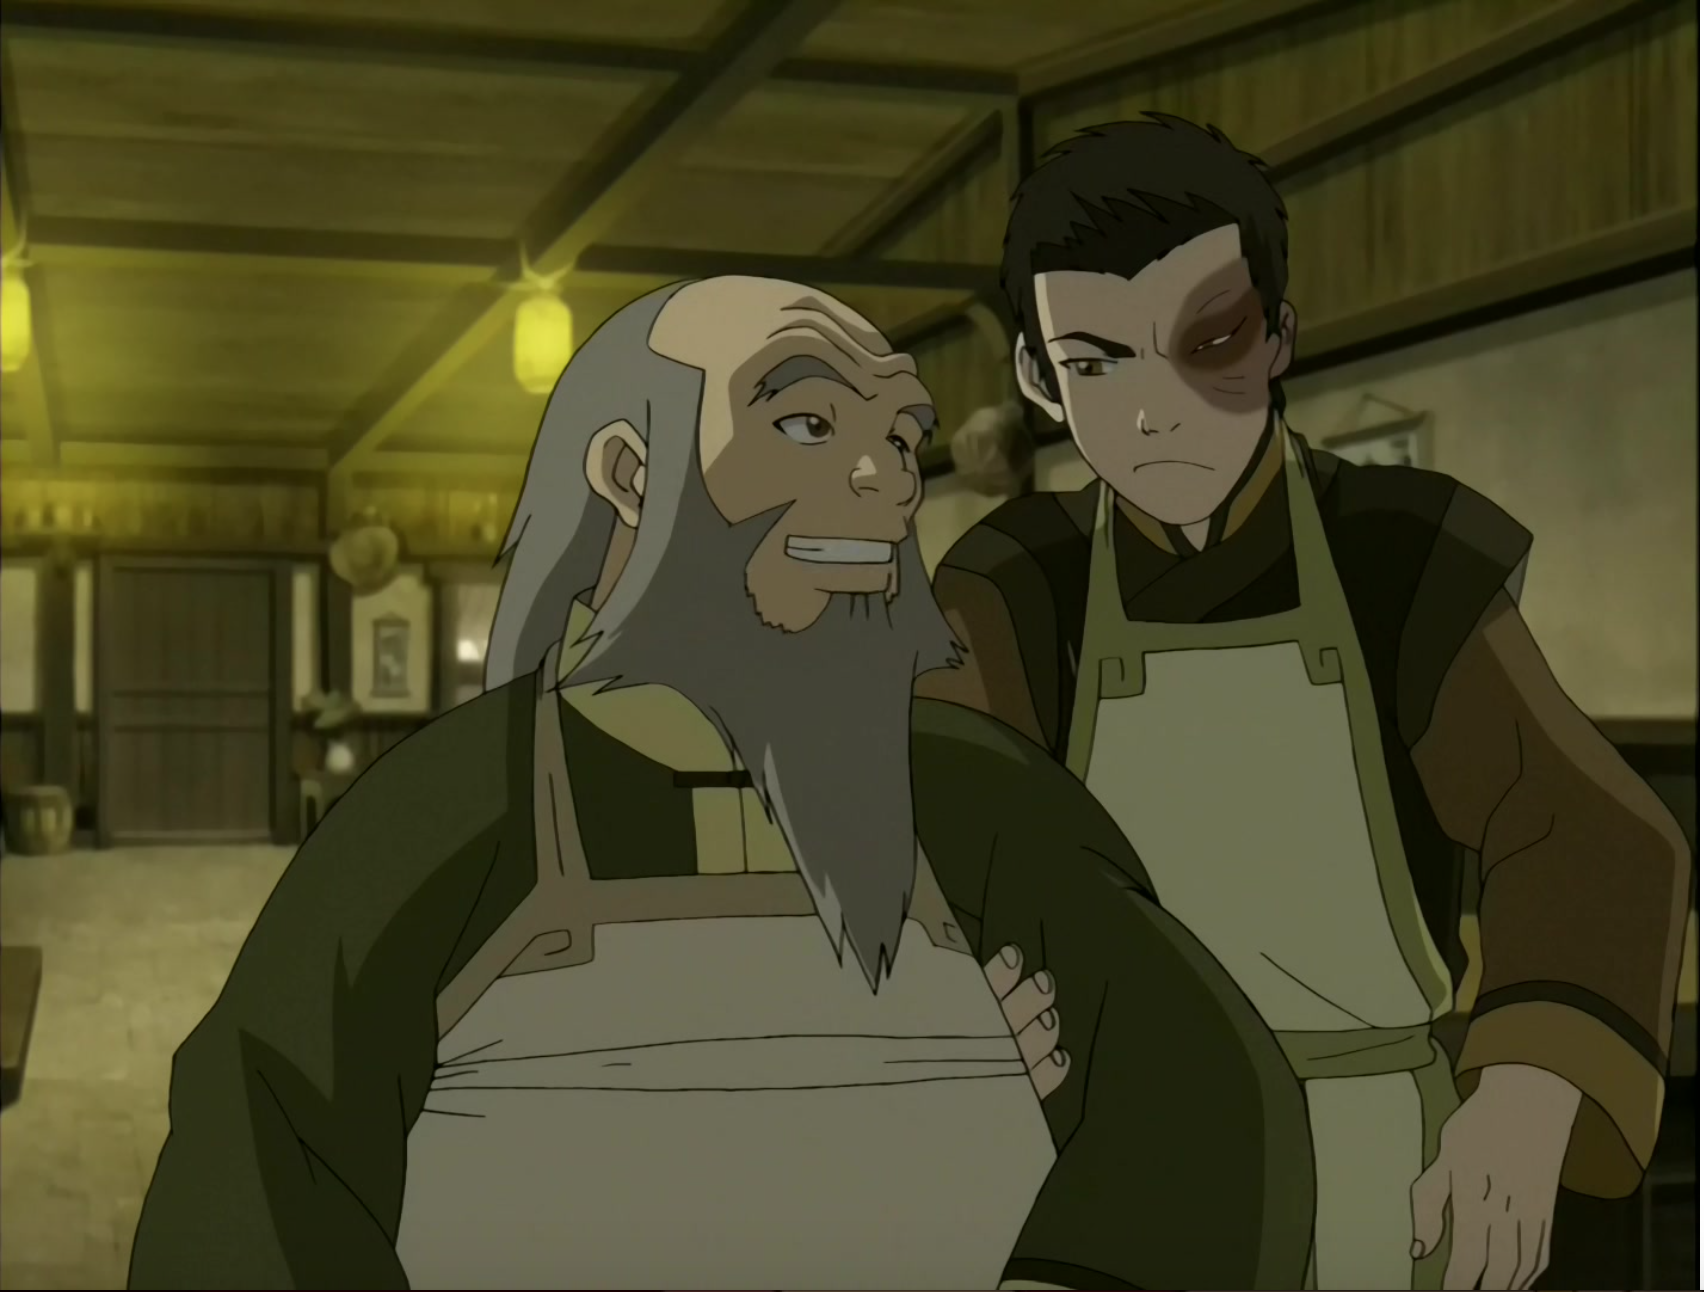 Zuko and his uncle Iroh stand in the tea shop that employed them.